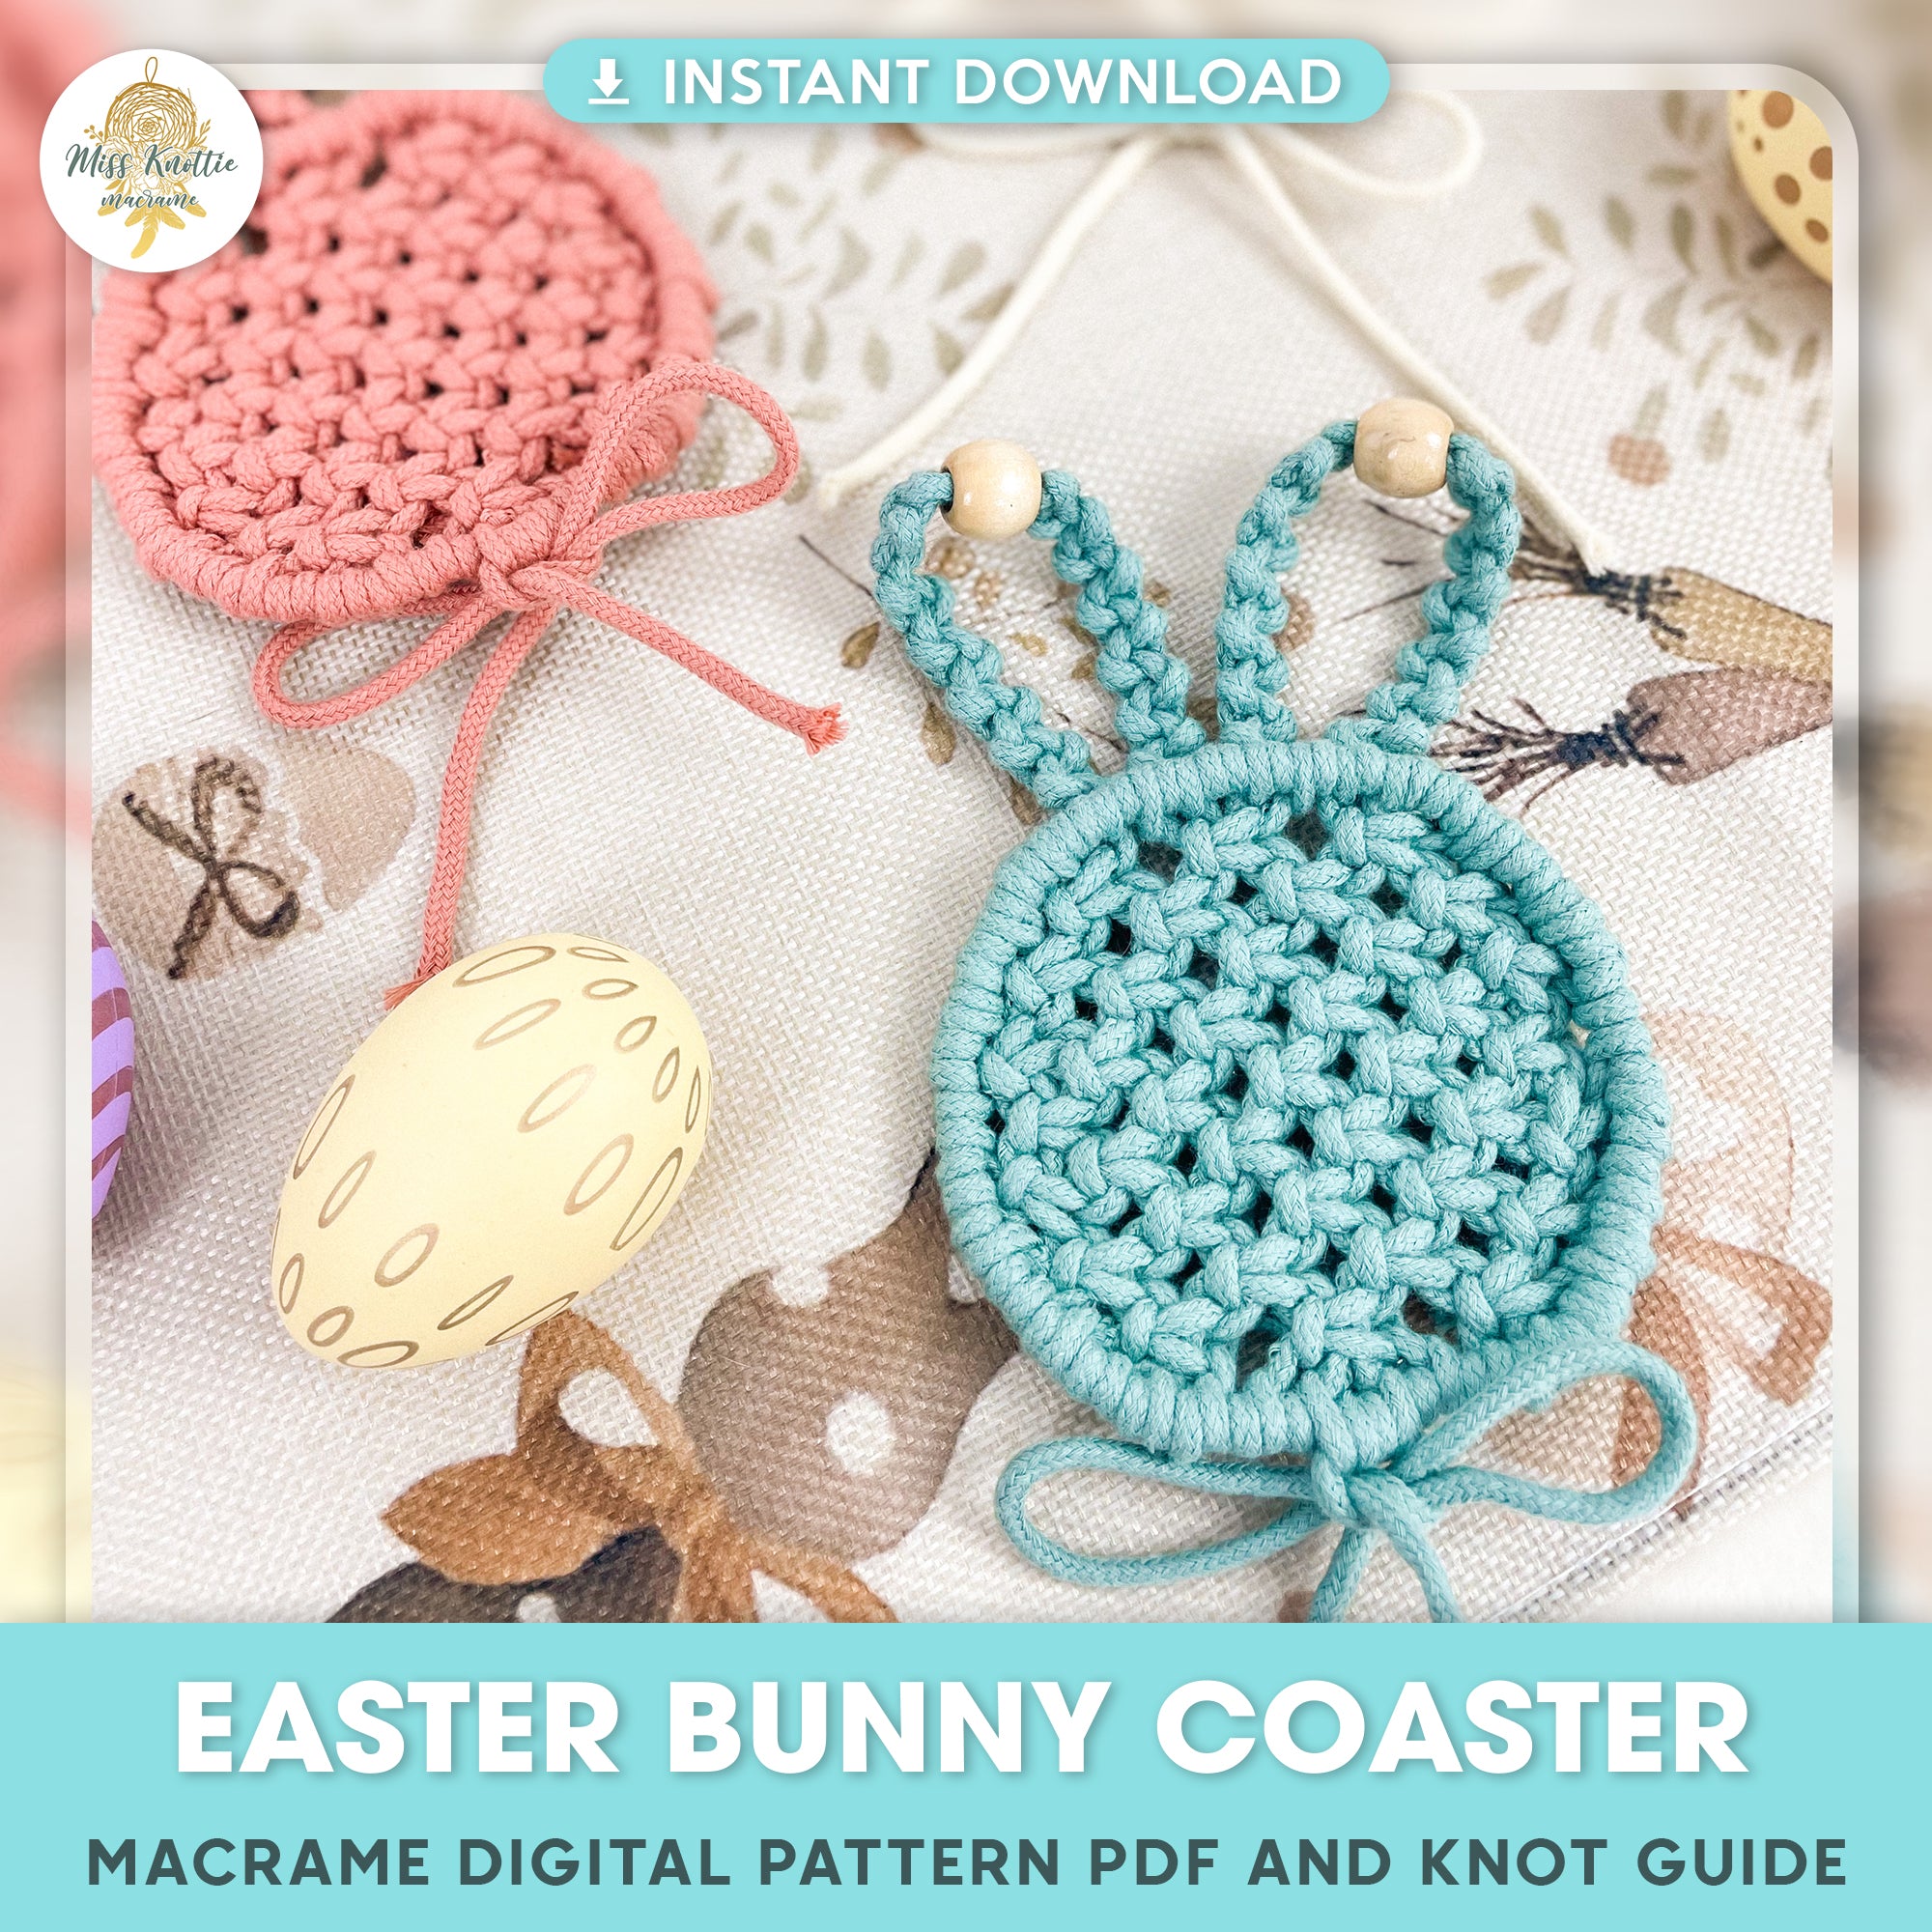 Easter Bunny Coaster - Digital PDF and Knot Guide